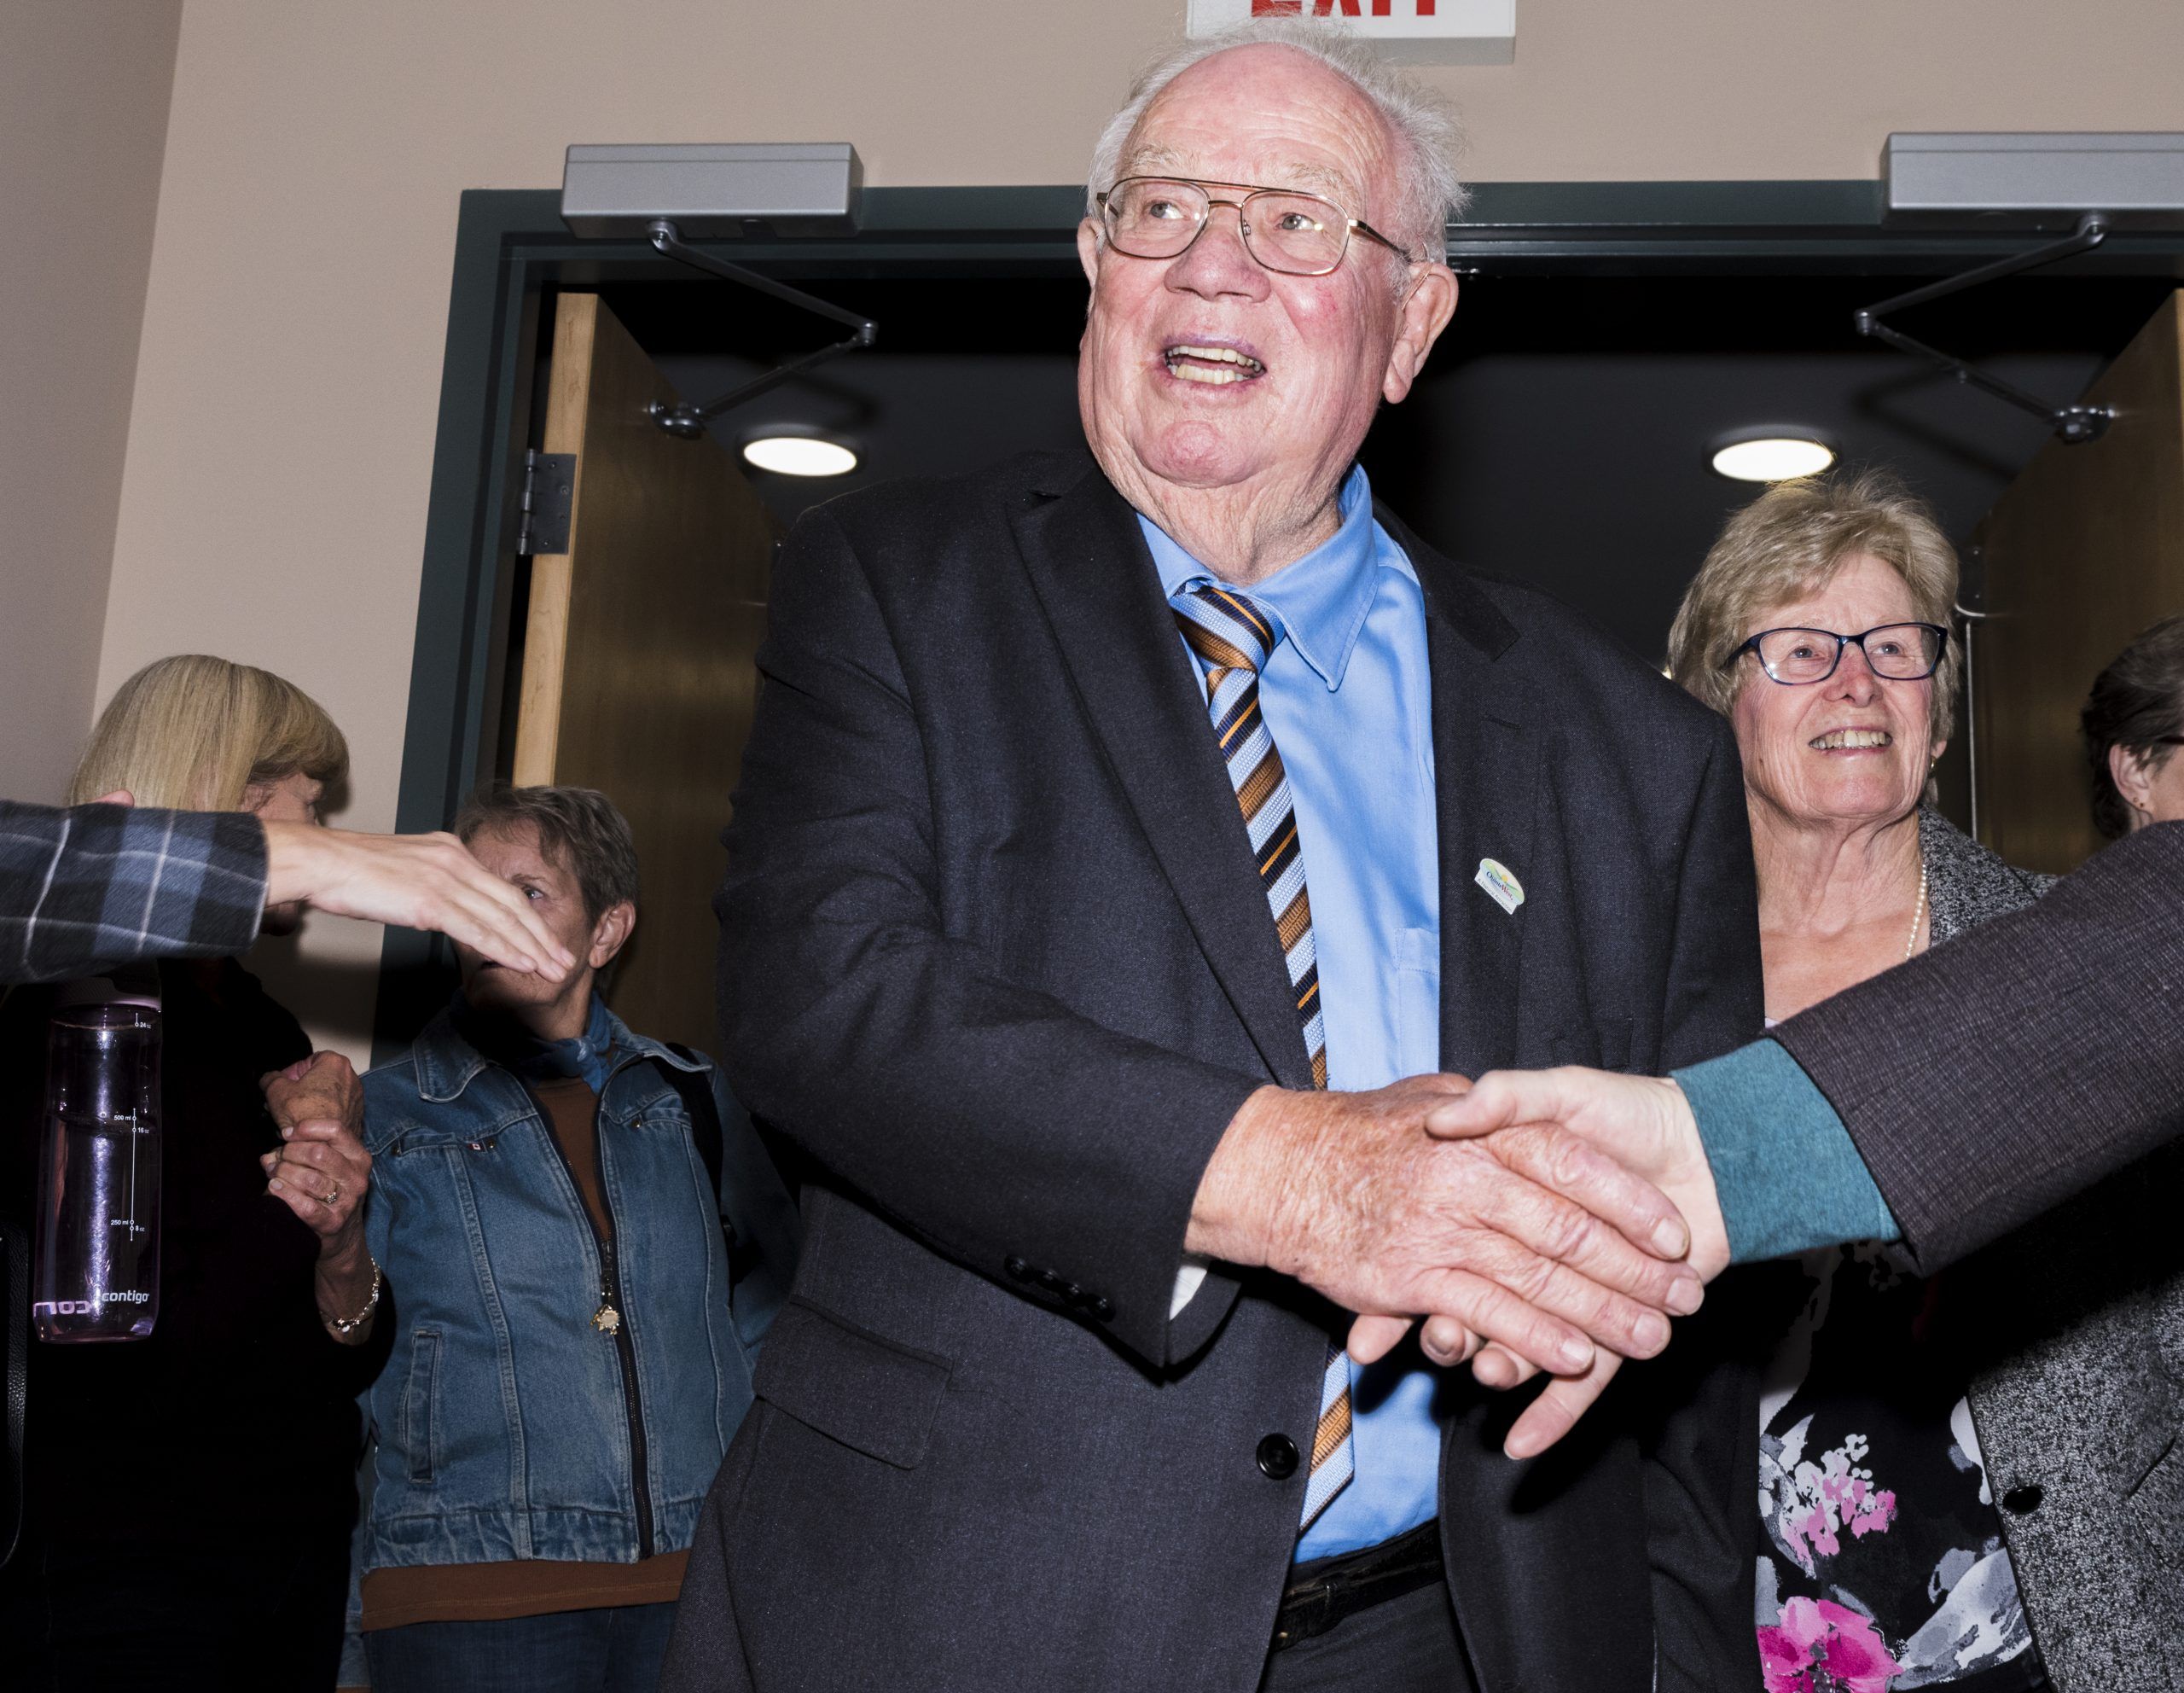 Jim Harrison gets third term as Mayor of Quinte West The Kingston